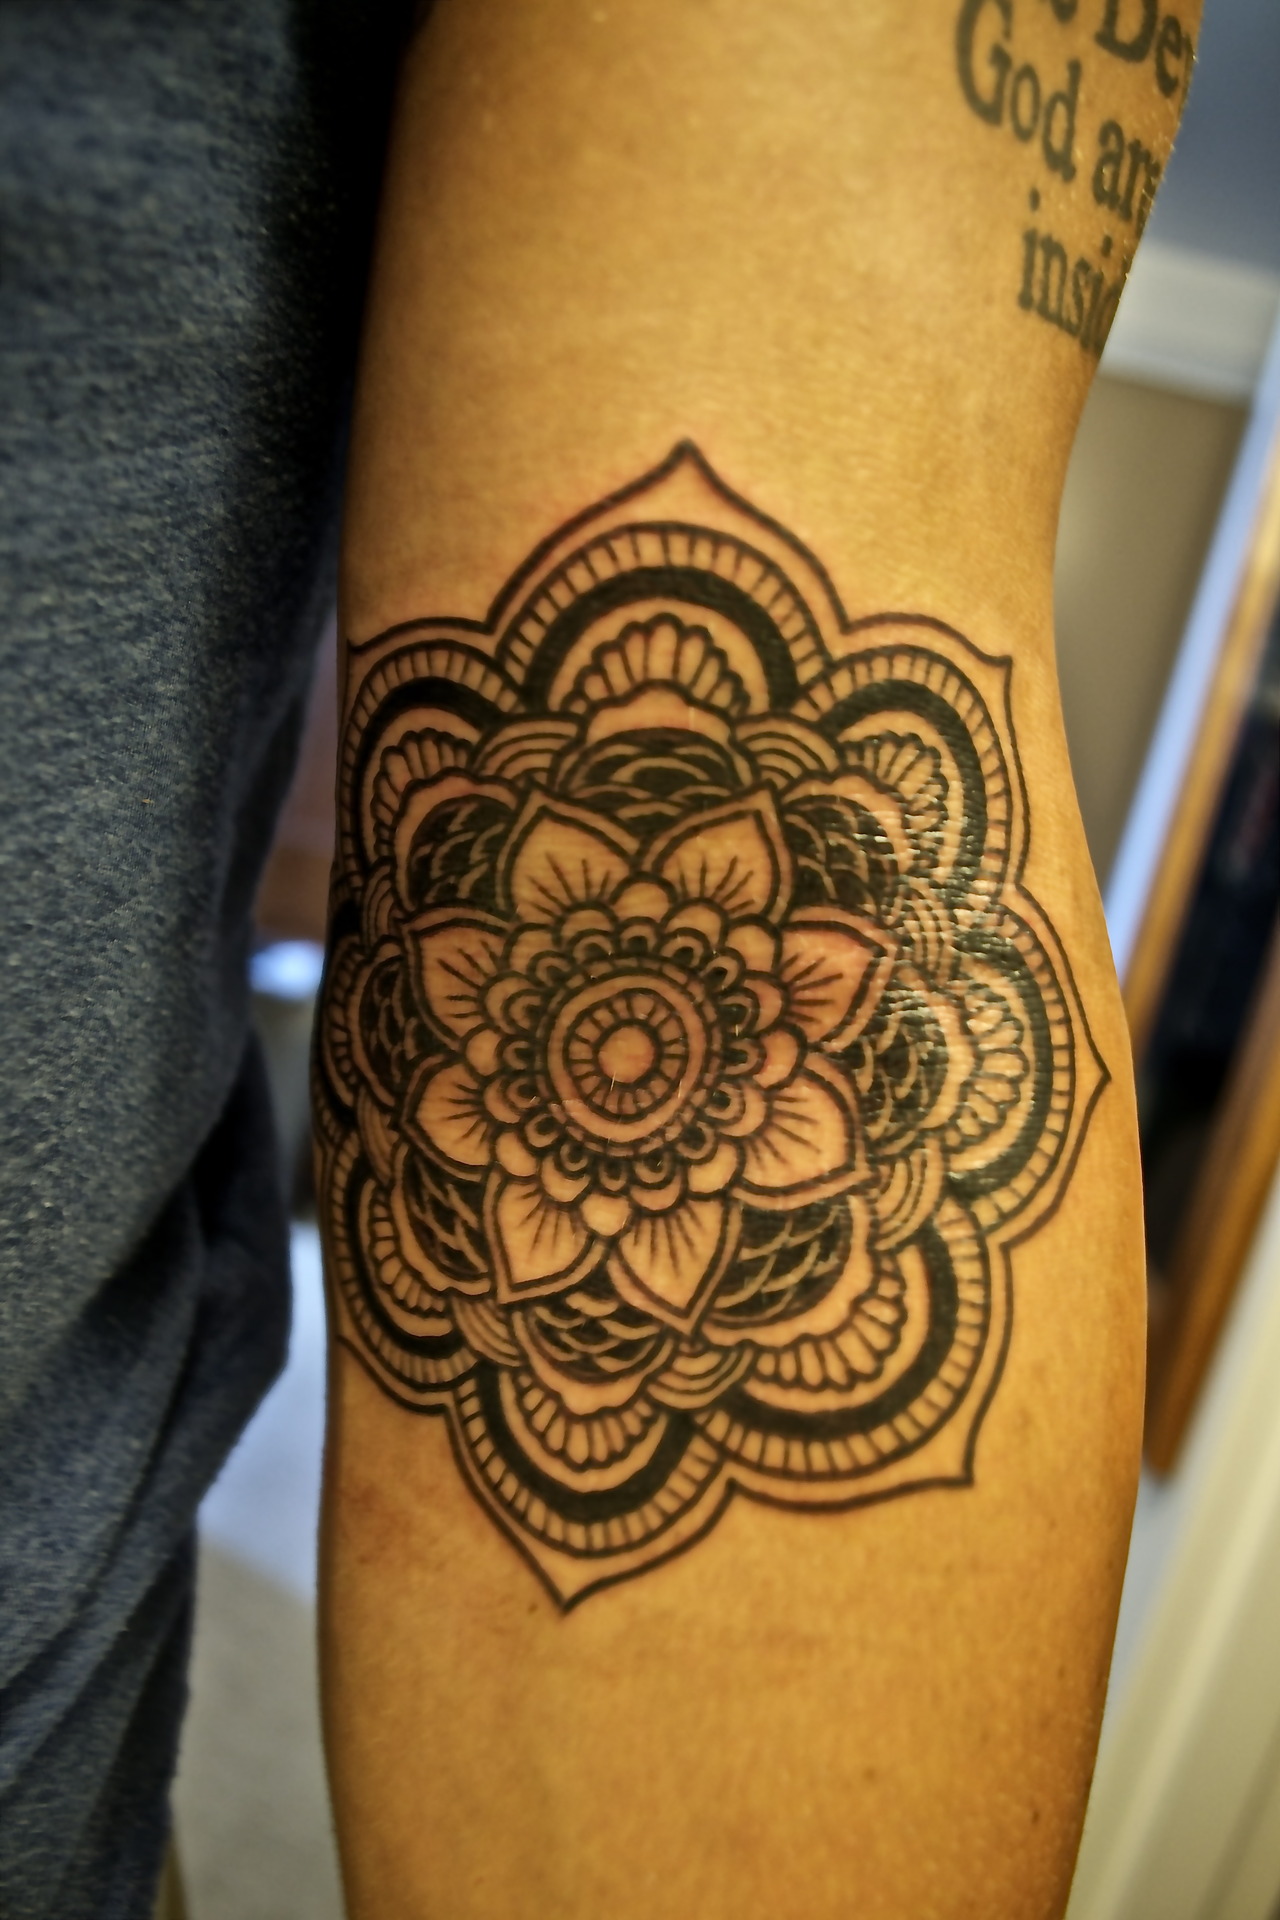 Awesome flower tattoo on arm